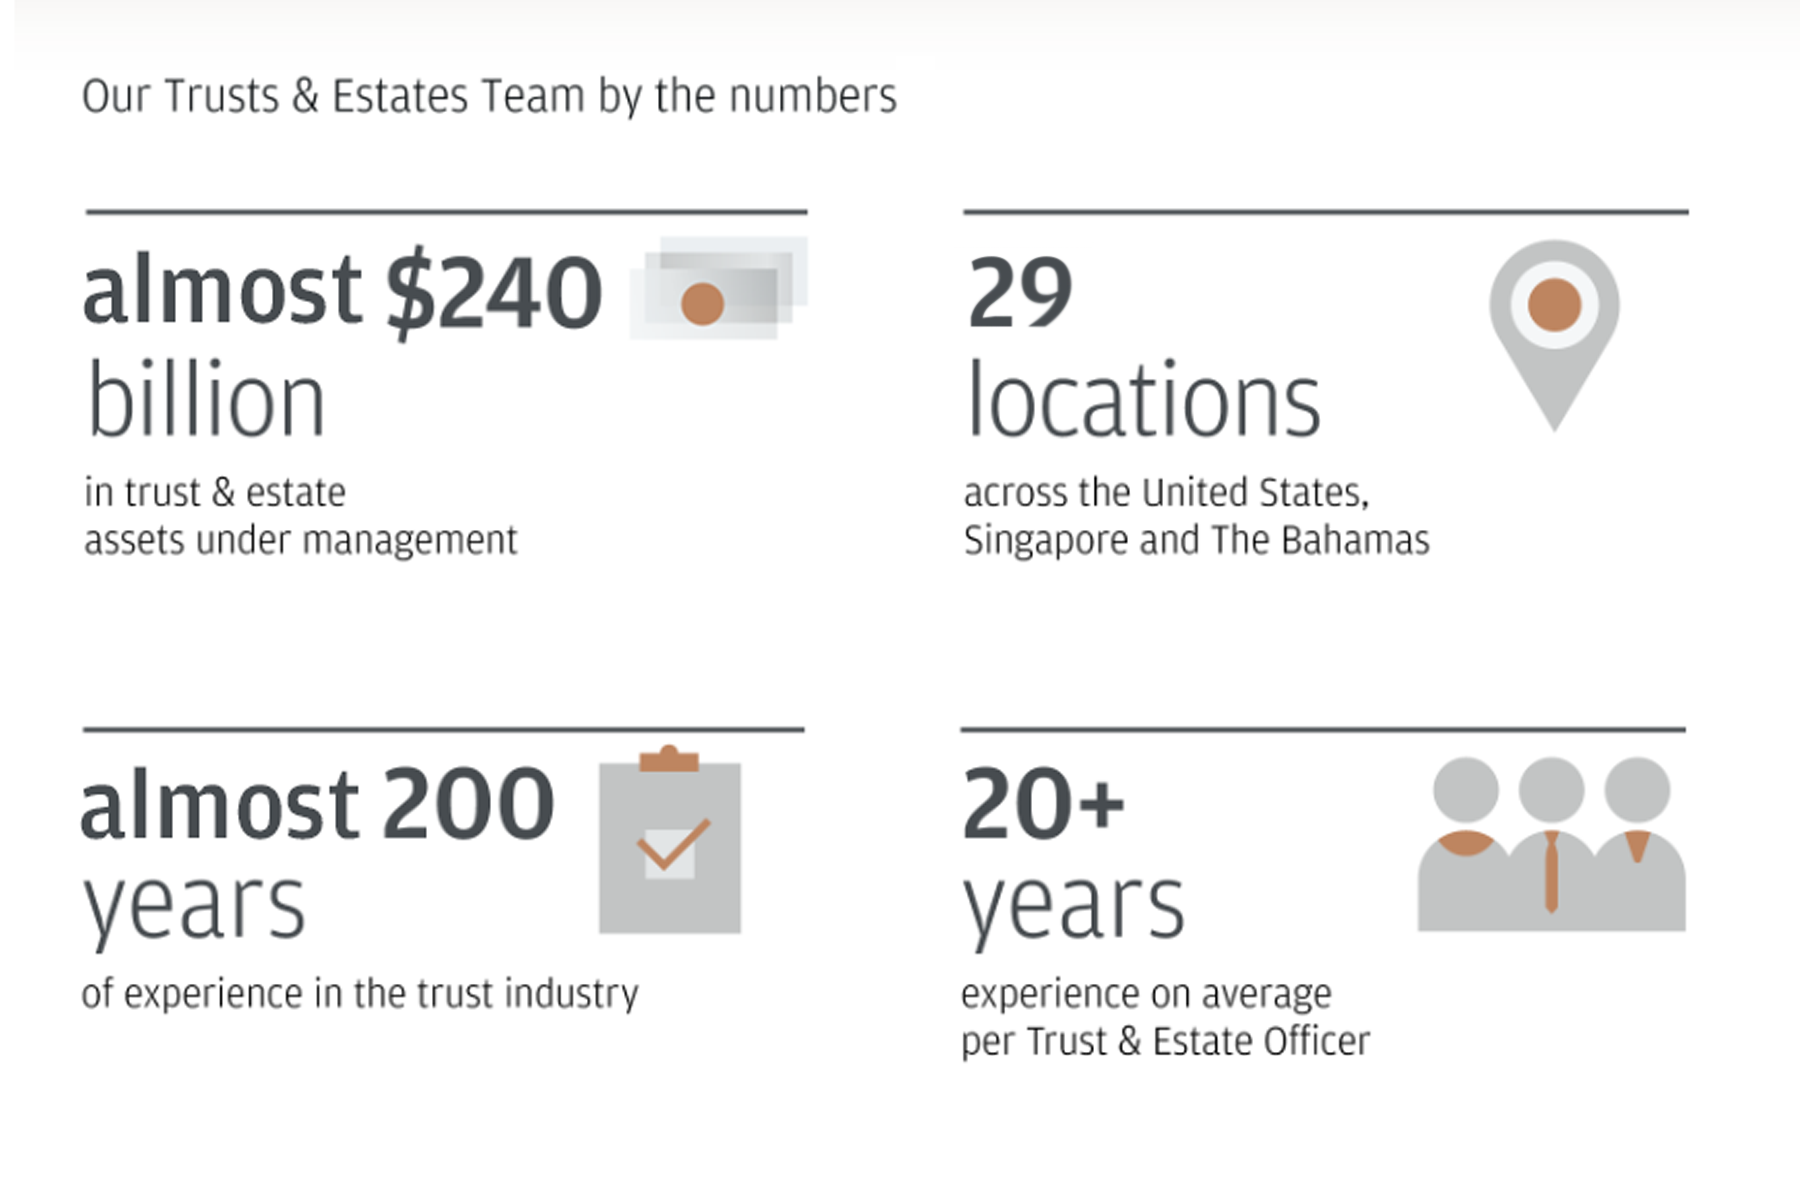 This chart includes a breakdown of our Trusts & Estates team by the numbers.